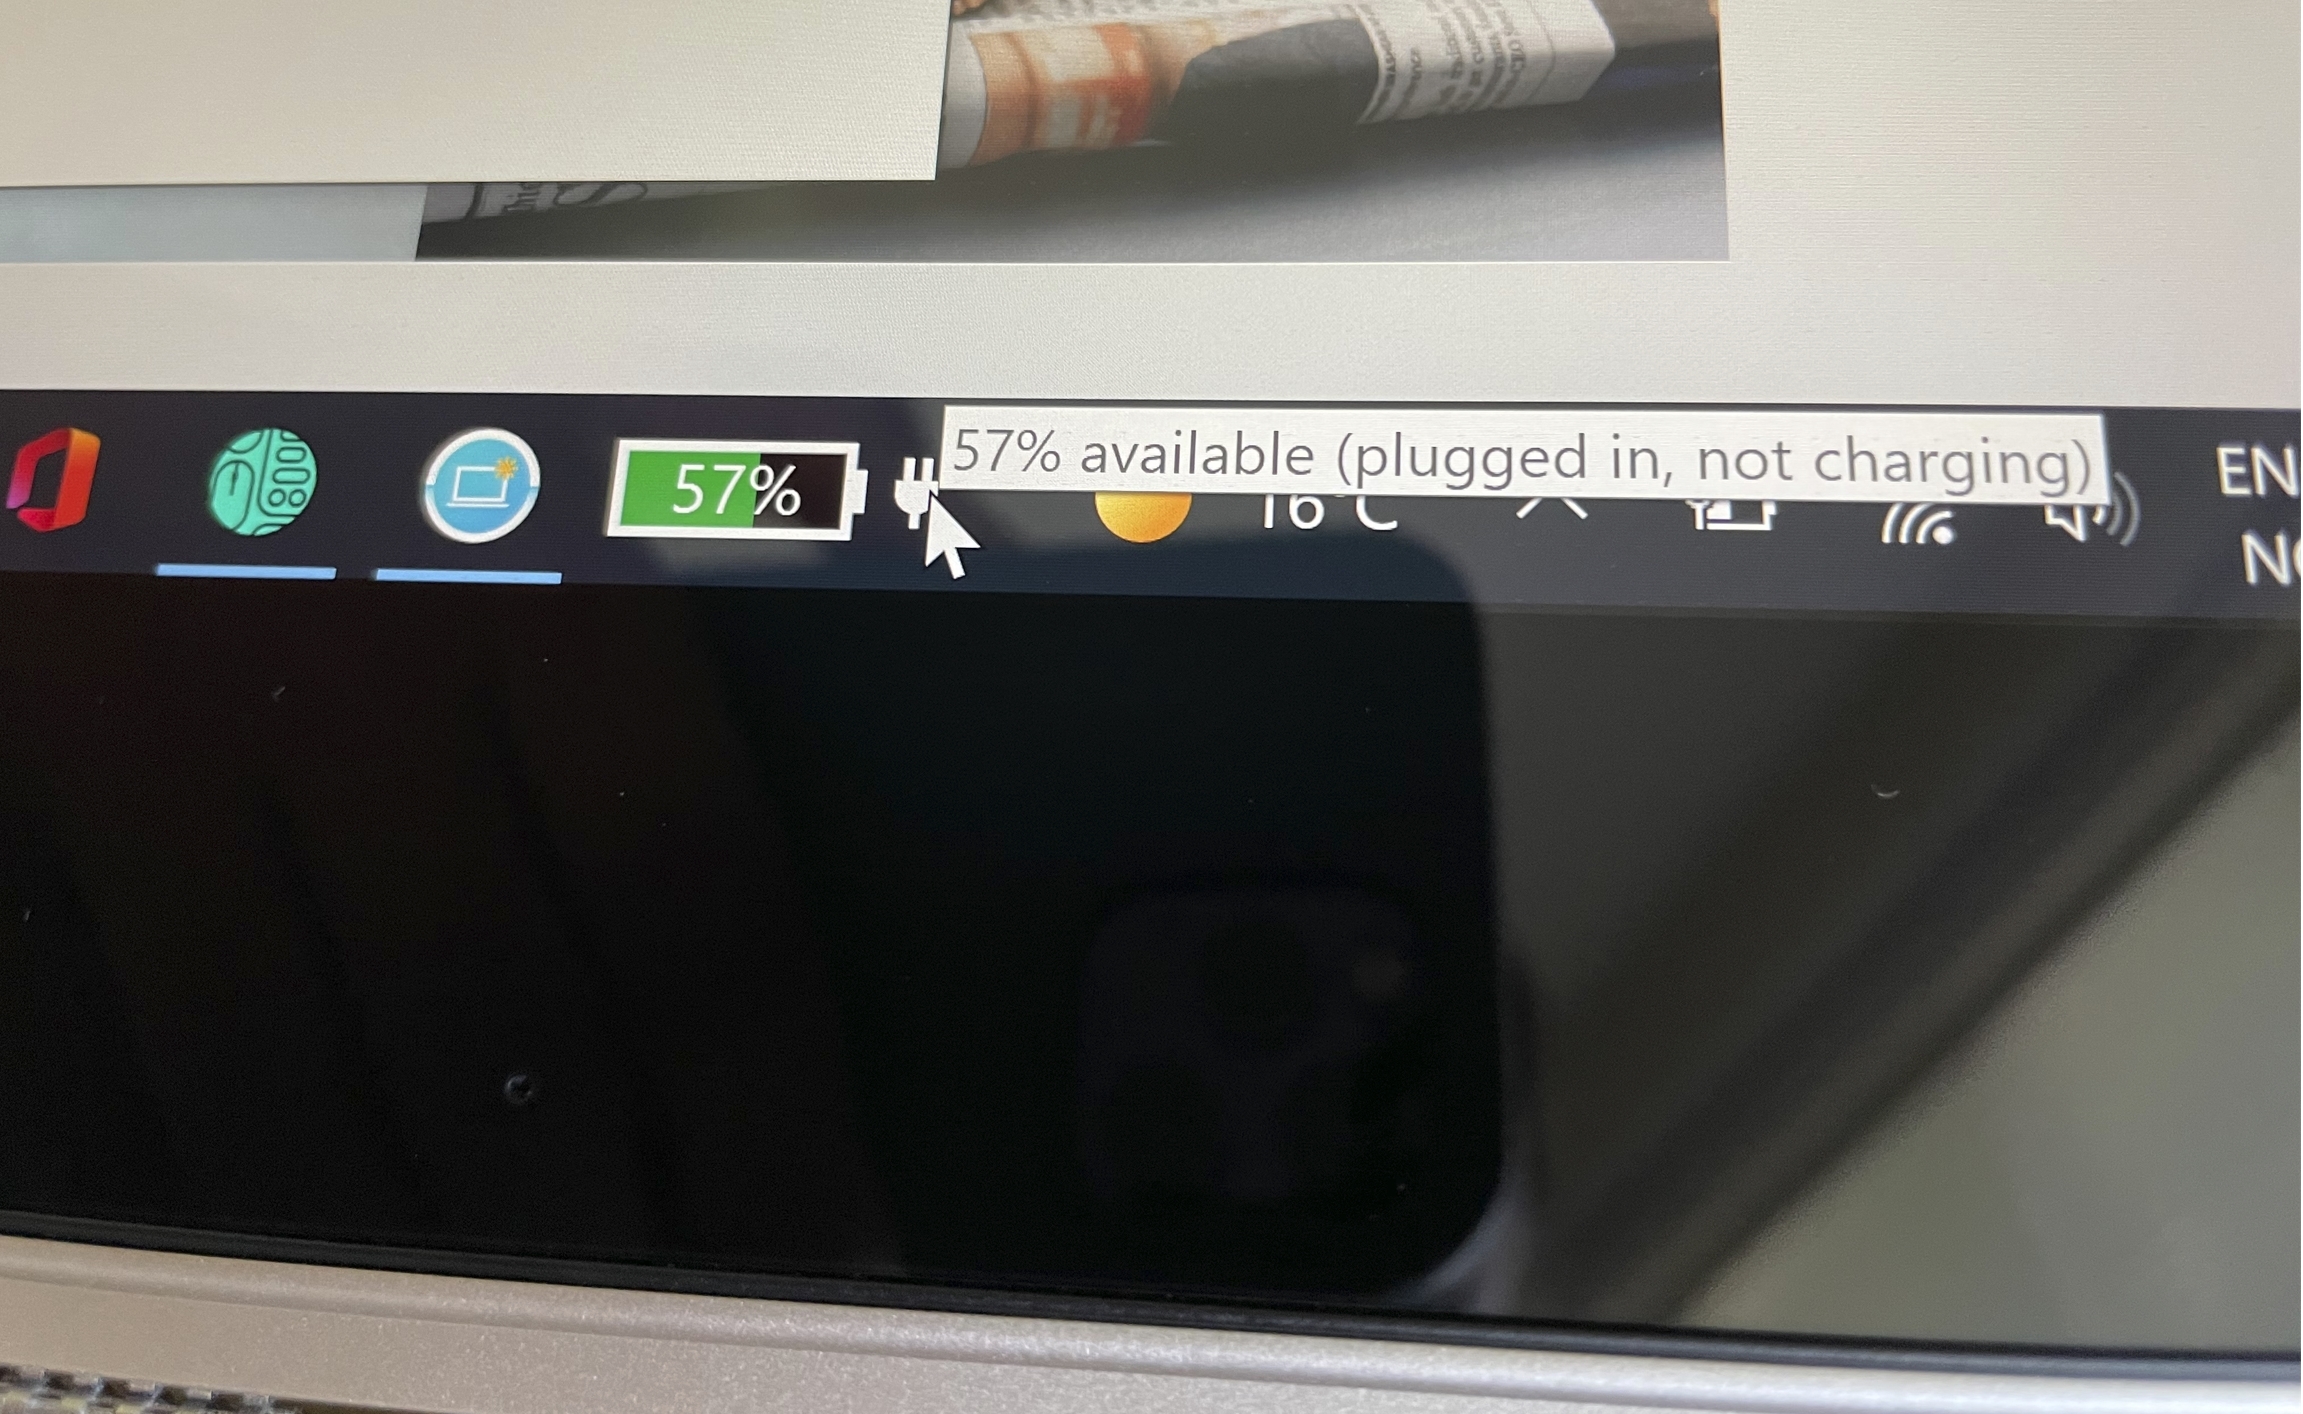 Yoga-910-plugged-in-not-charging-as-soon-as-Windows-loads - English Community LENOVO